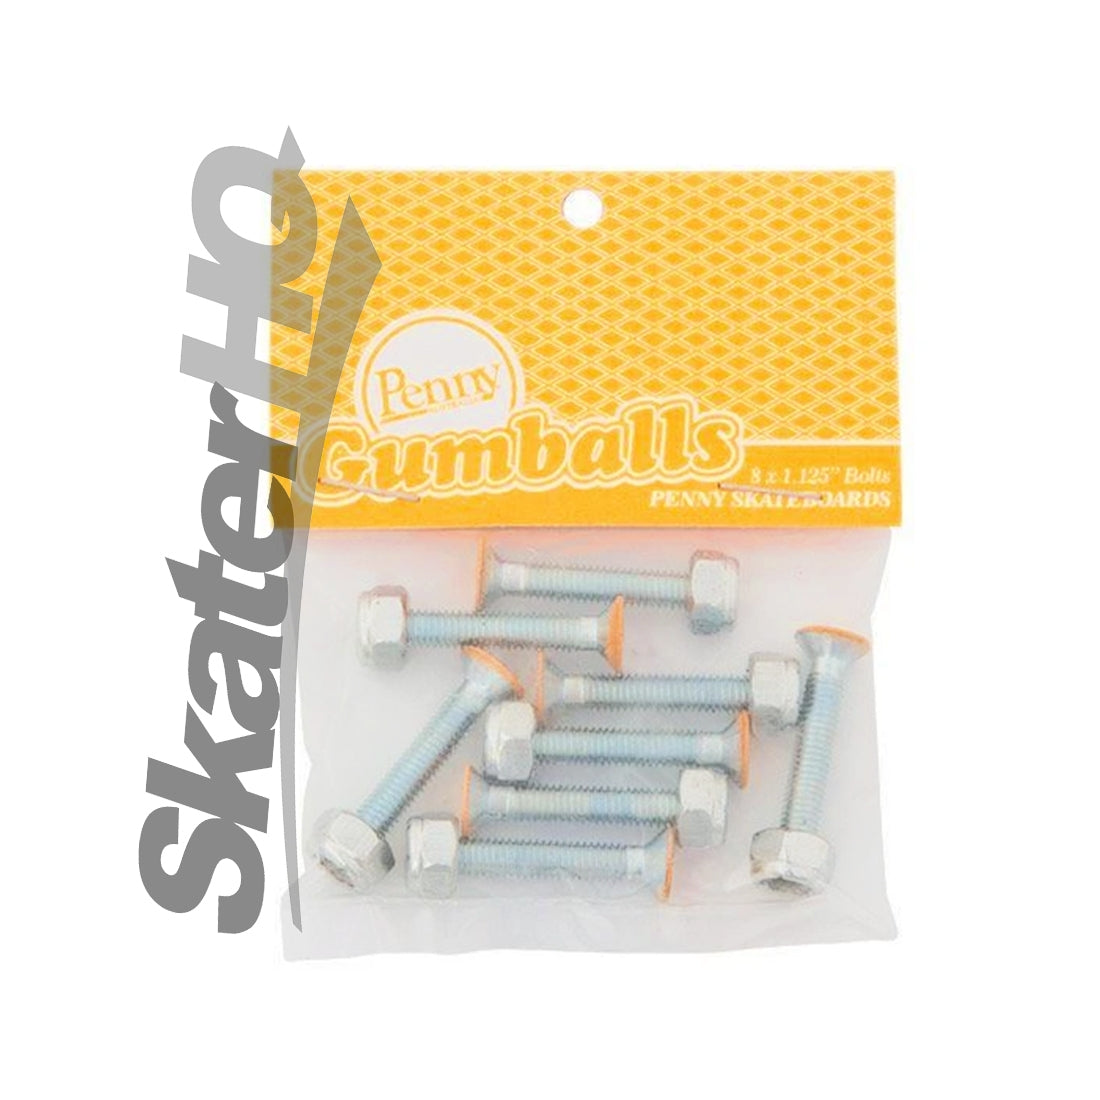 Penny Gumball 1.125 Bolts - Orange Skateboard Hardware and Parts